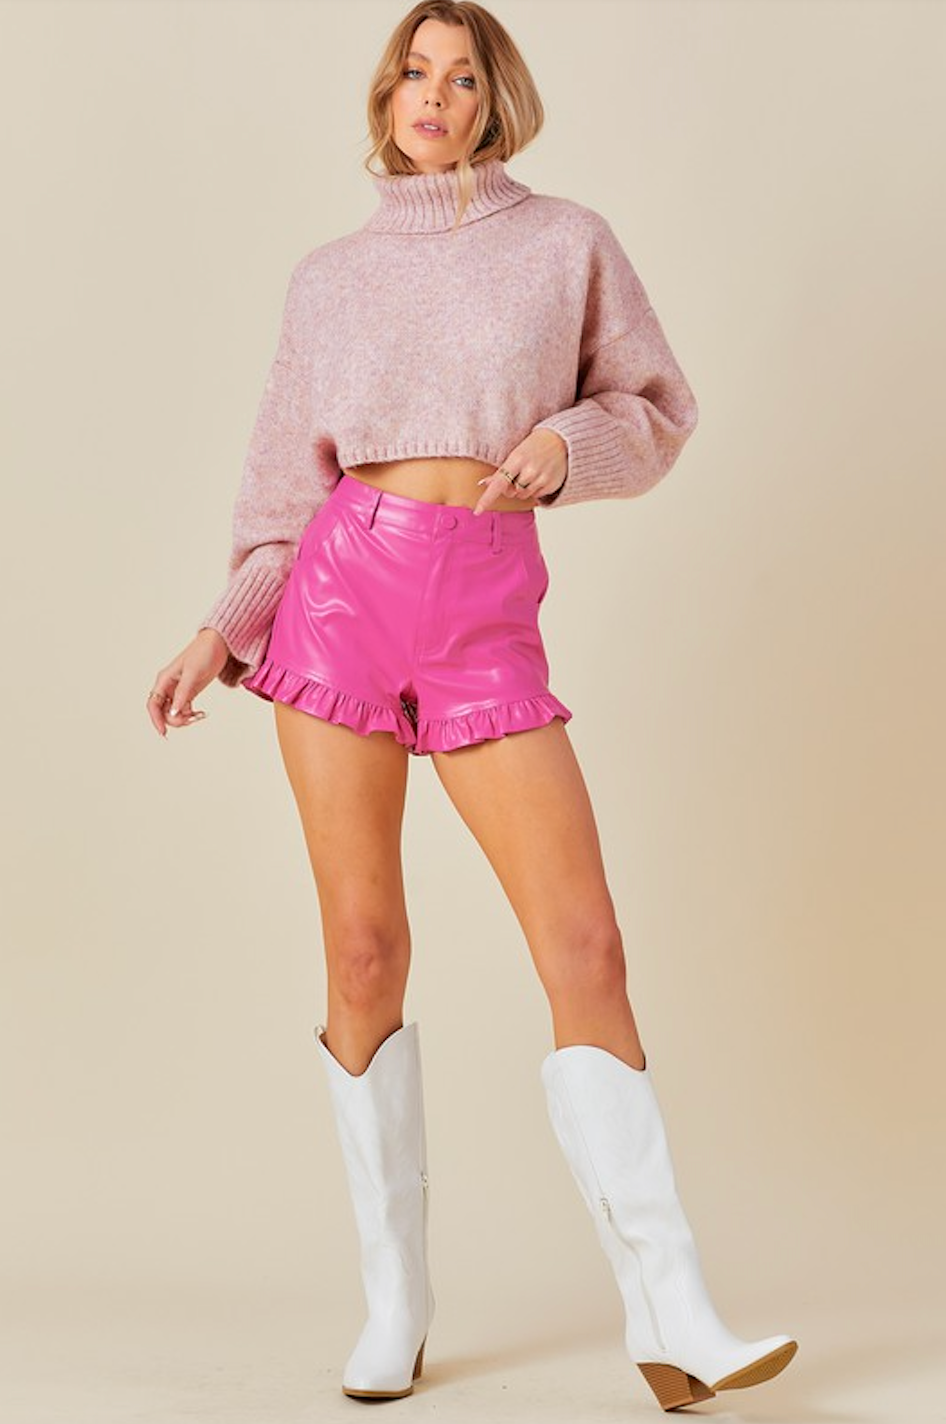 MANDY CROPPED SWEATER IN MARLED MAUVE